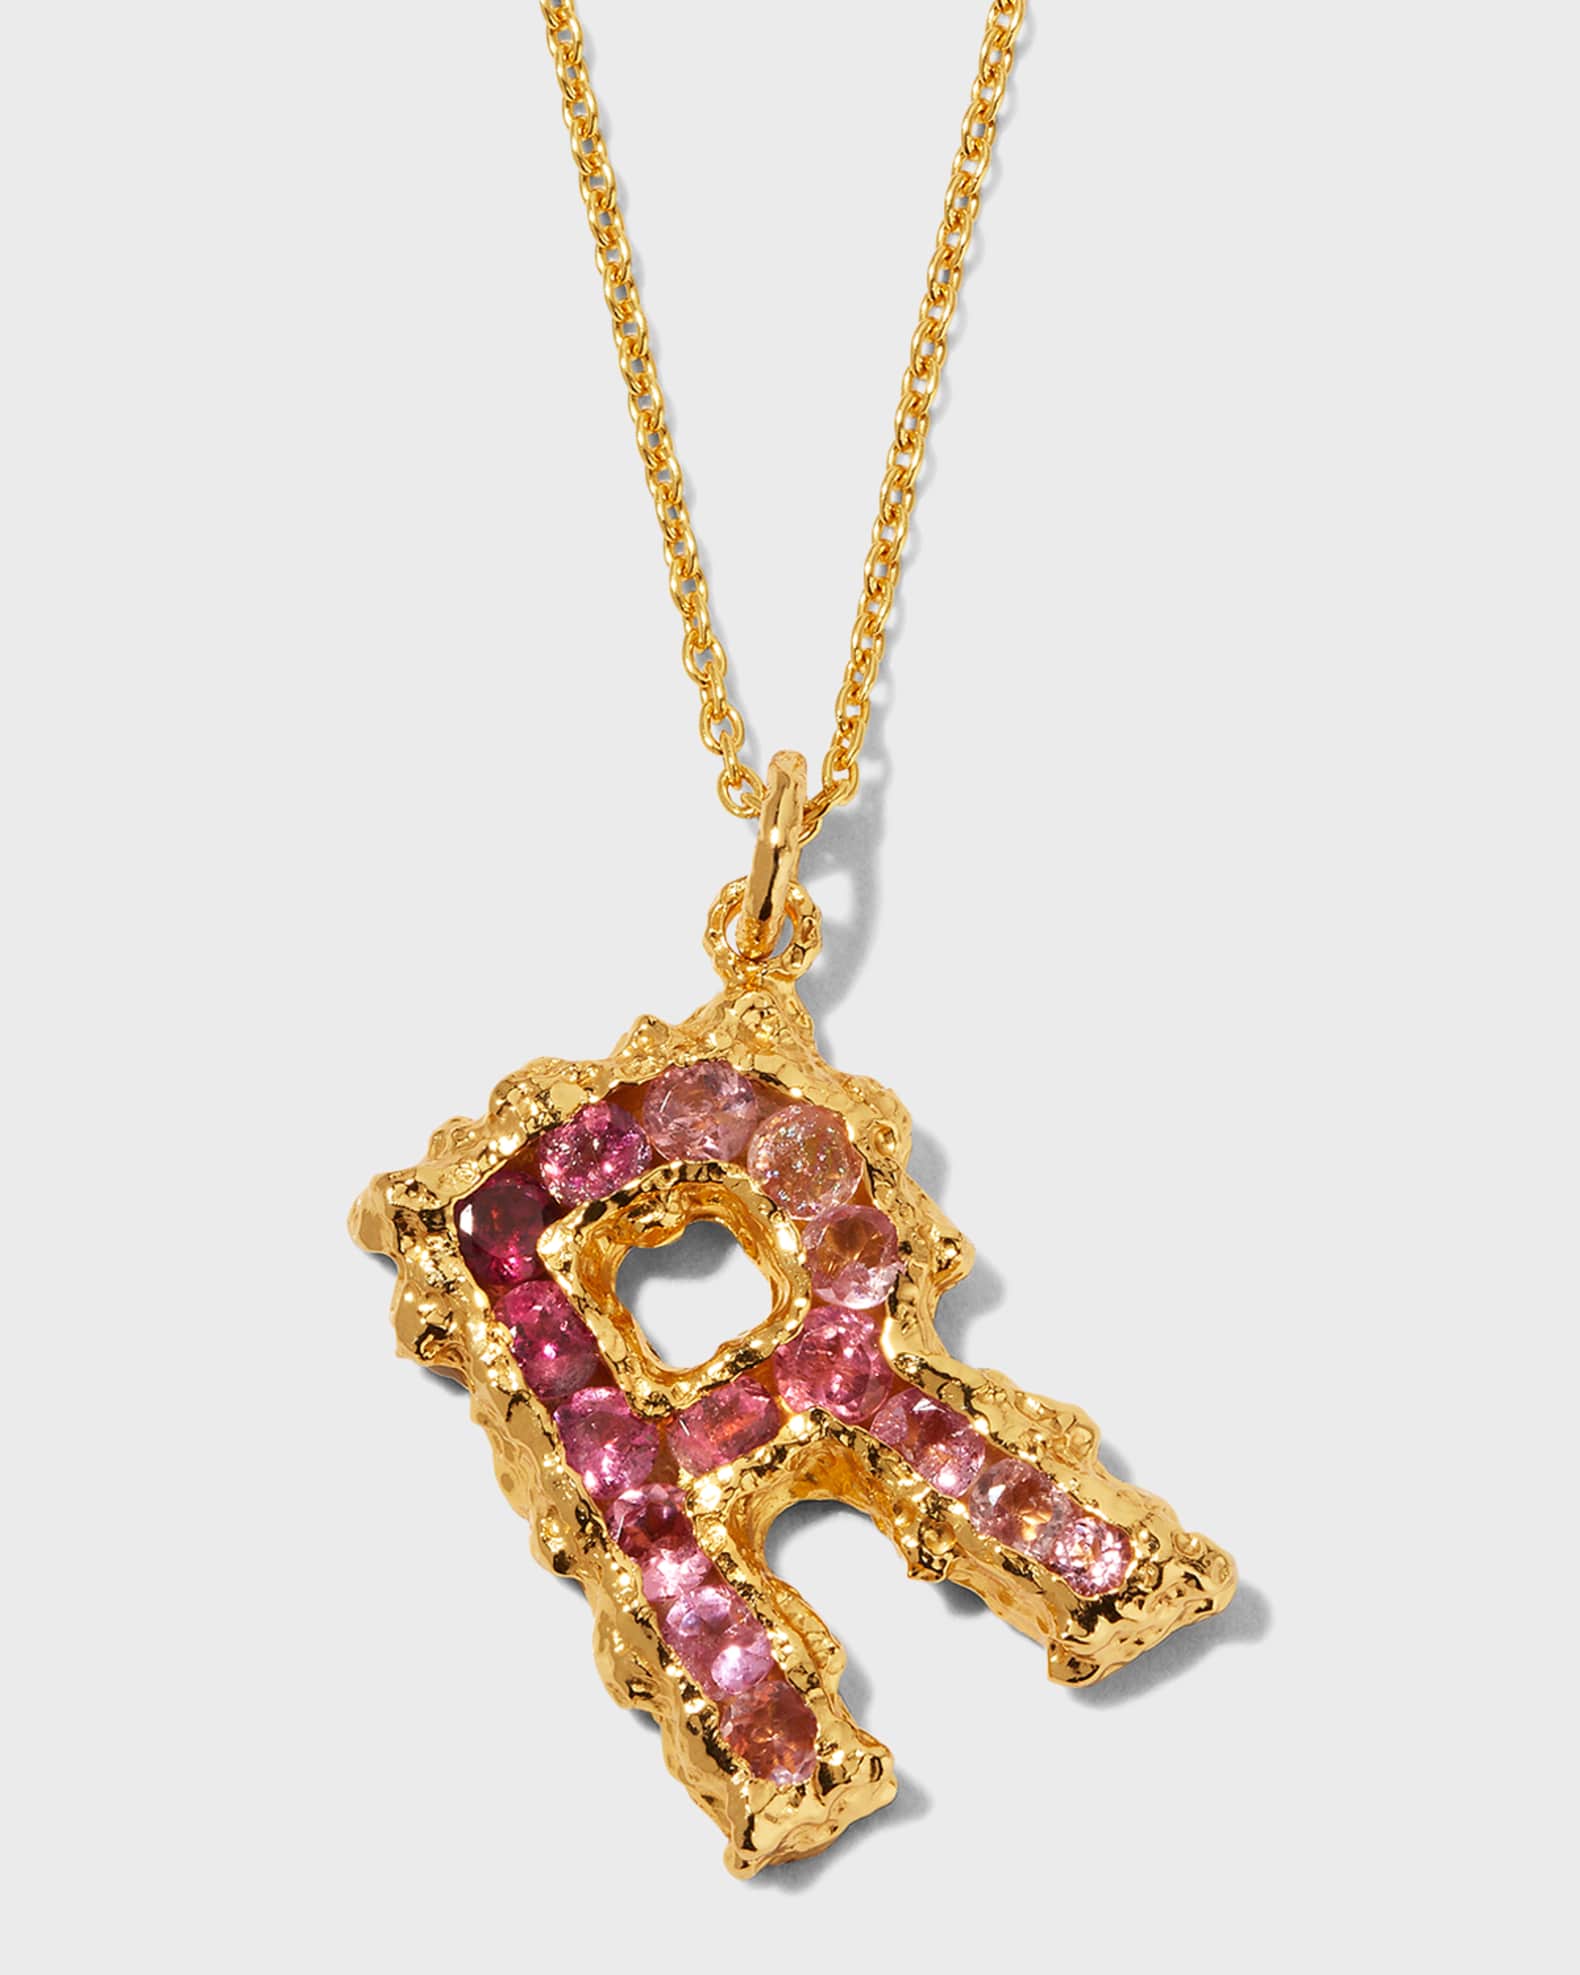 LOUIS VUITTON NECKLACE UNBOXING - 18 CARAT GOLD, PINK MOTHER OF